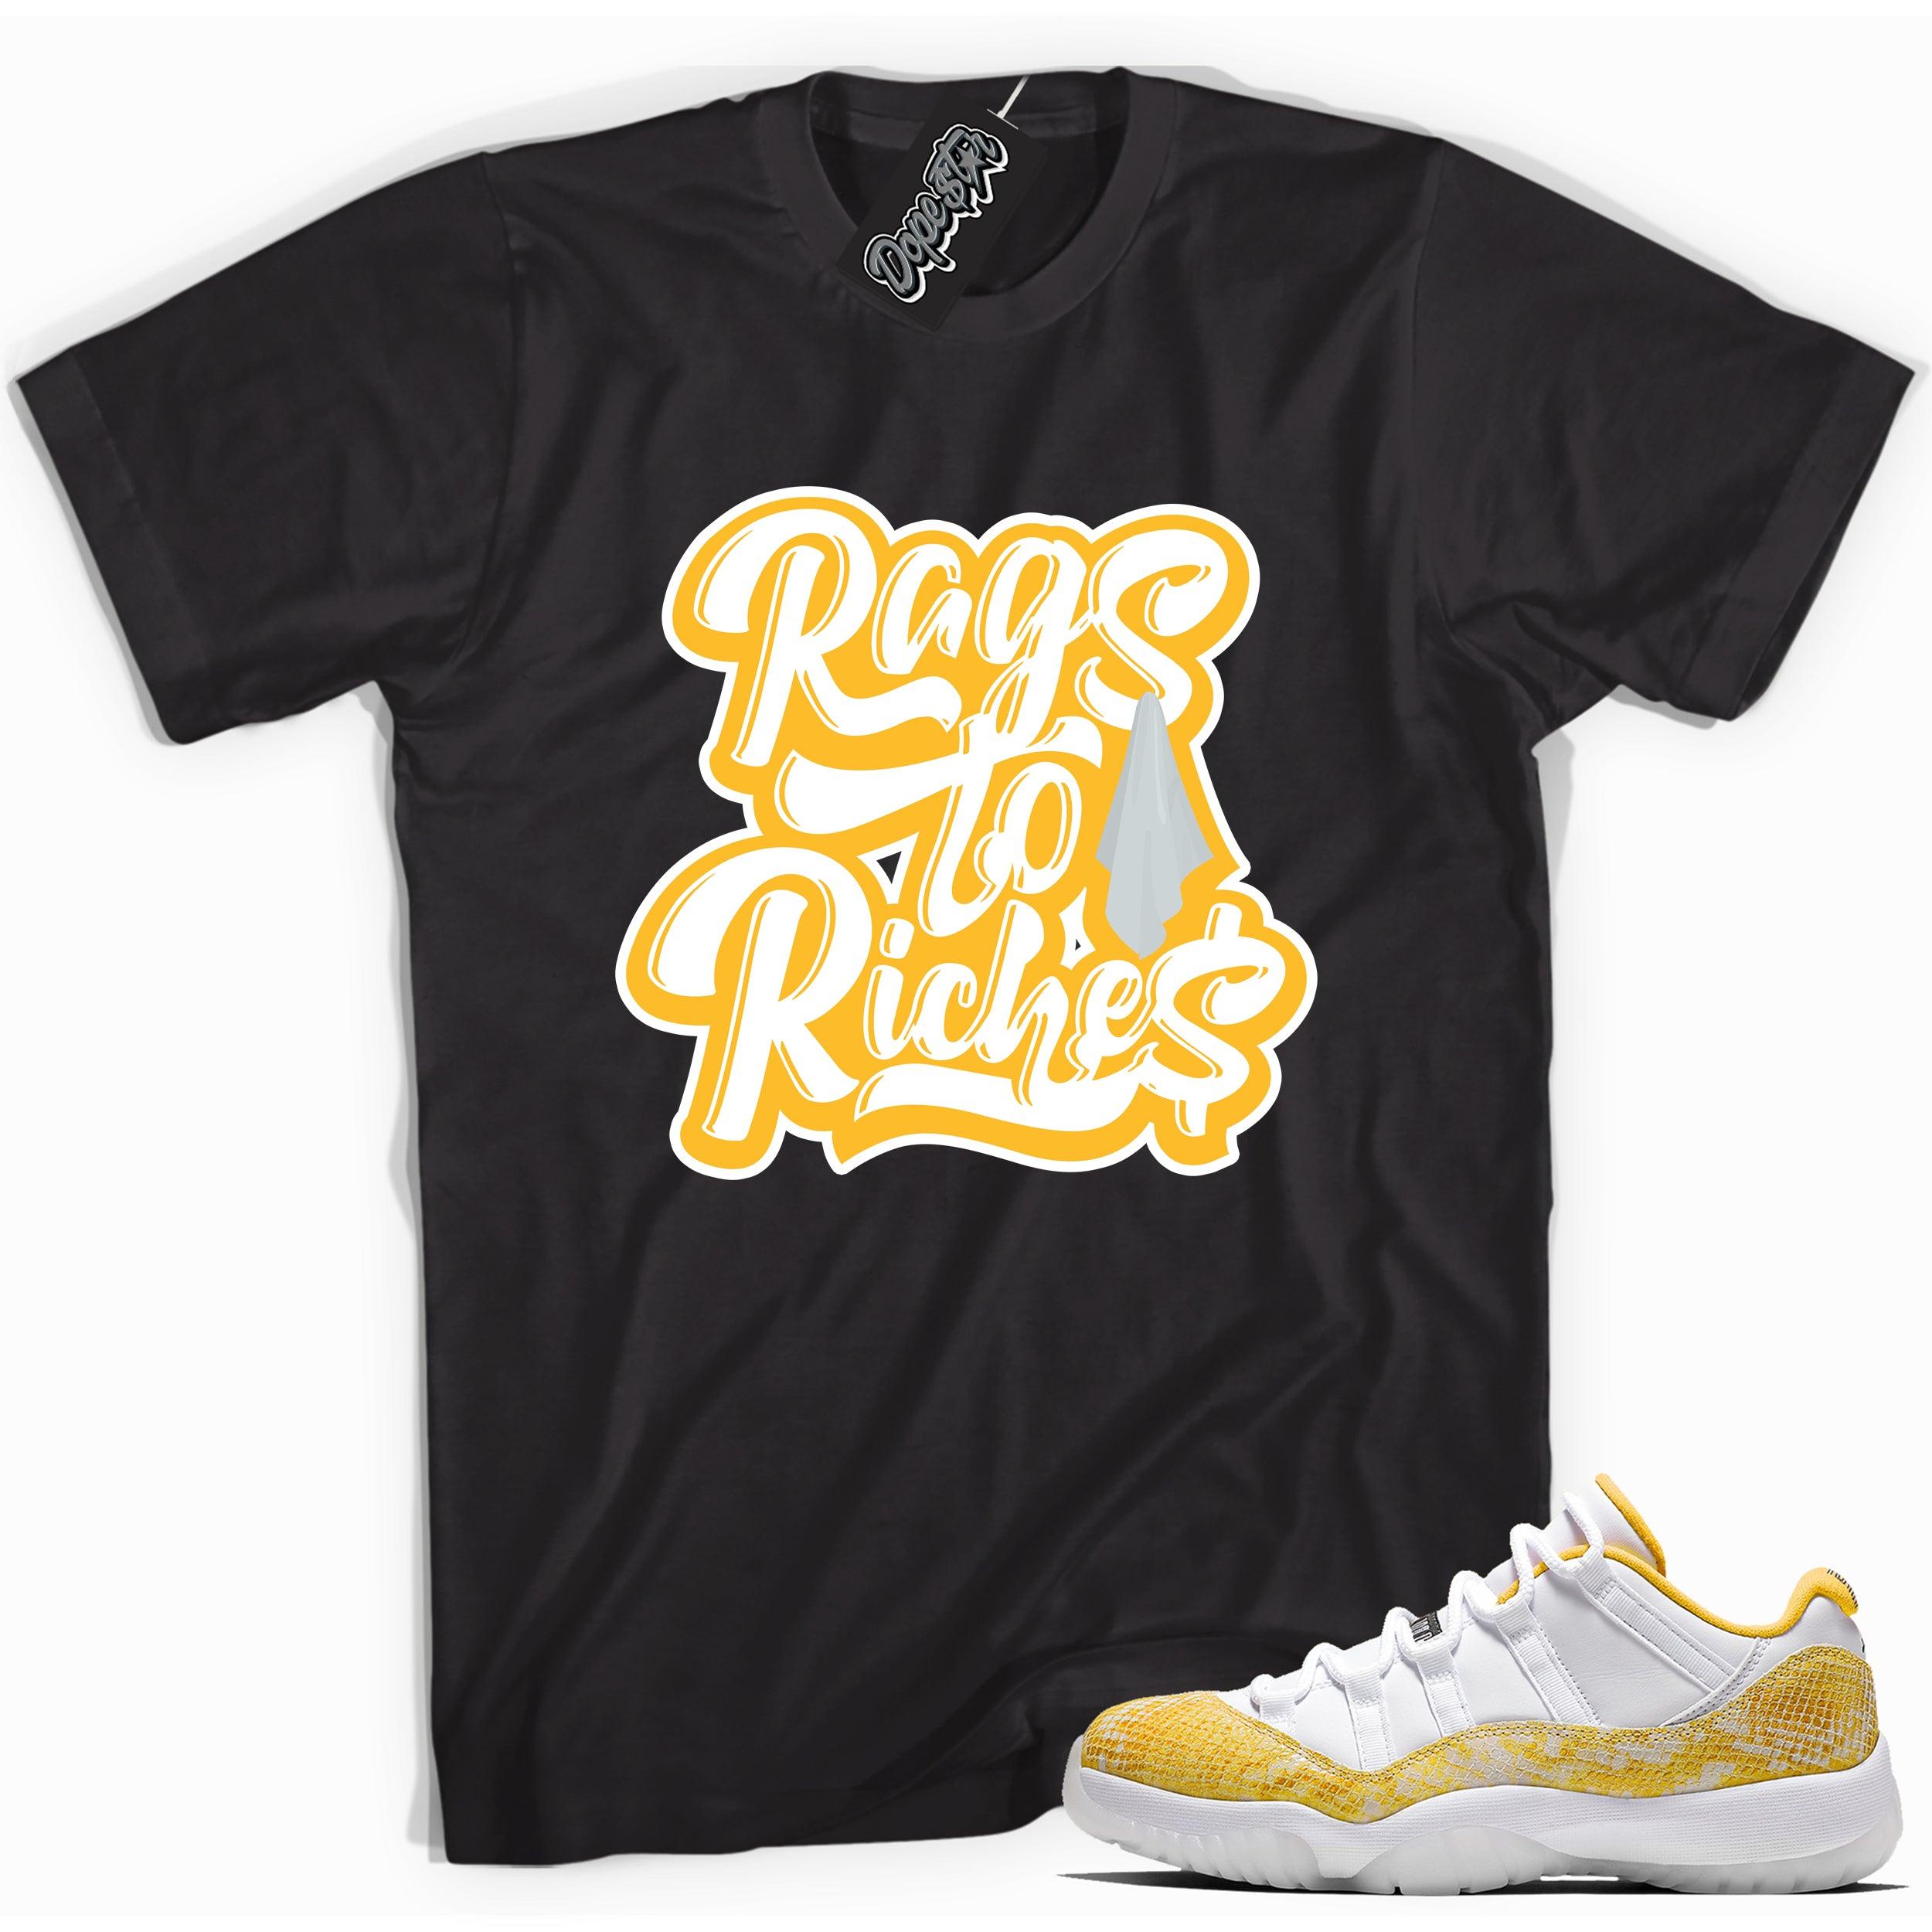 Cool black graphic tee with 'rags to riches' print, that perfectly matches  Air Jordan 11 Retro Low Yellow Snakeskin sneakers